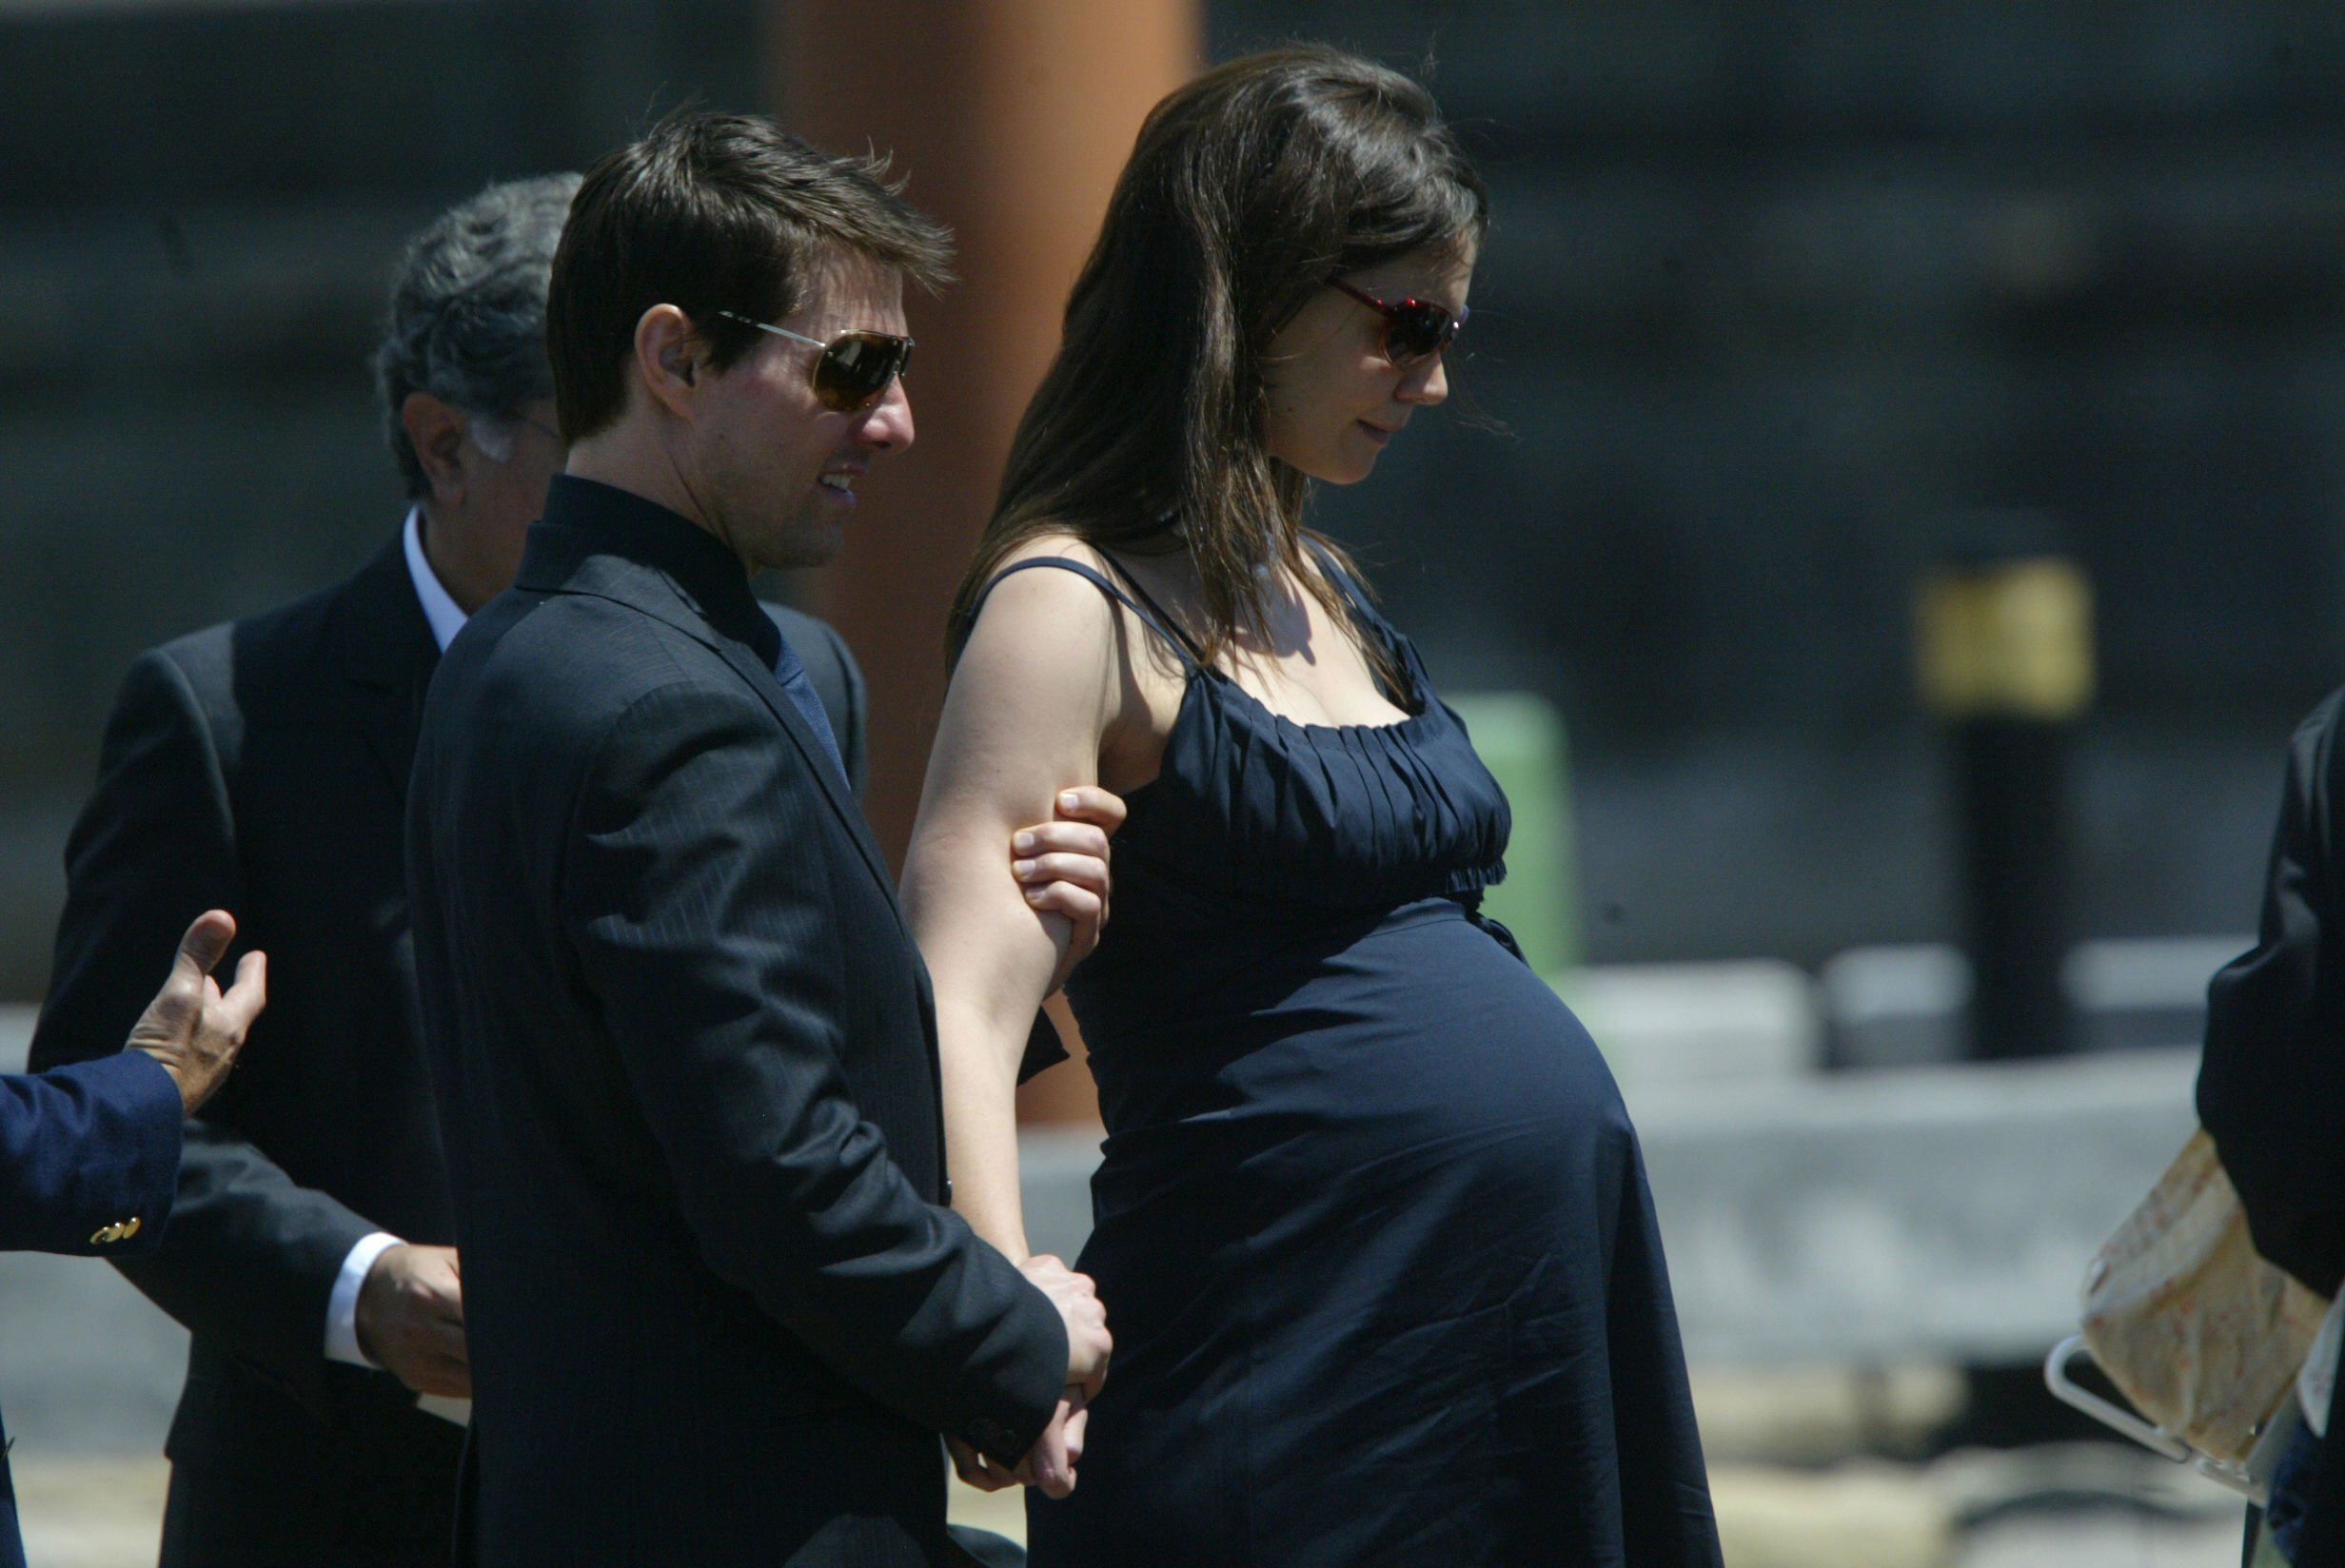 Tom Cruise and his pregnant fiancée Katie Holmes leave a memorial service at the Sydney Opera House in 2006. | Source: Getty Images